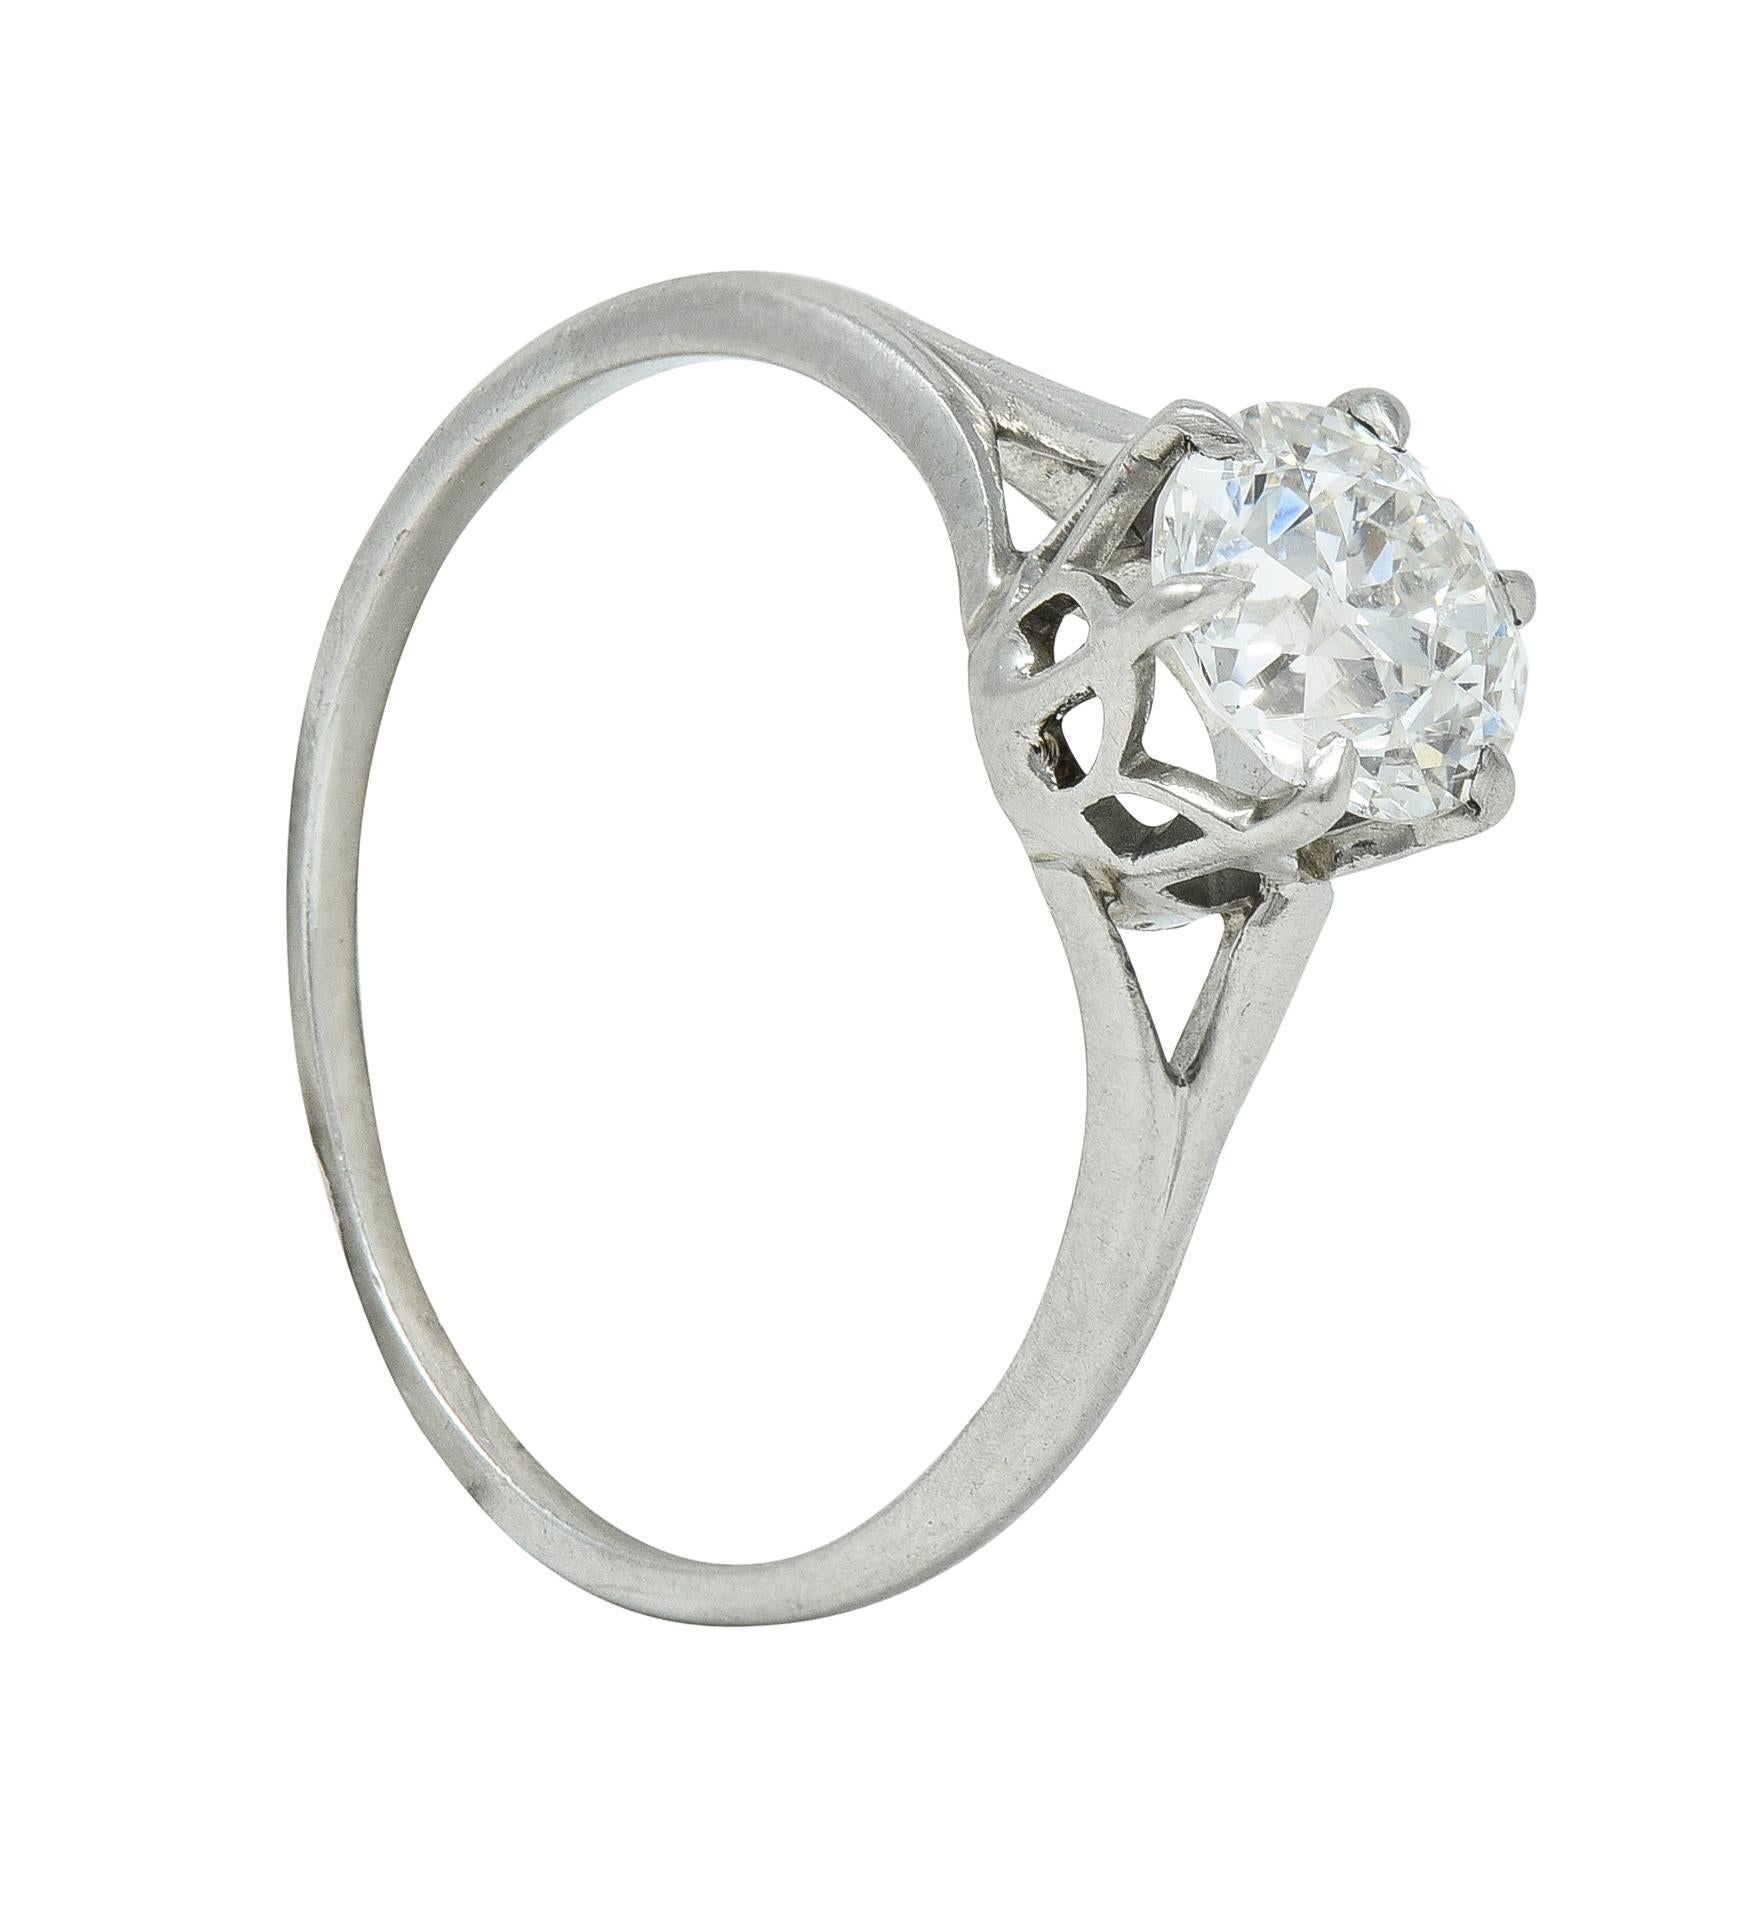 Early Art Deco 0.73 CTW Old European Cut Diamond Platinum Engagement Ring For Sale 6